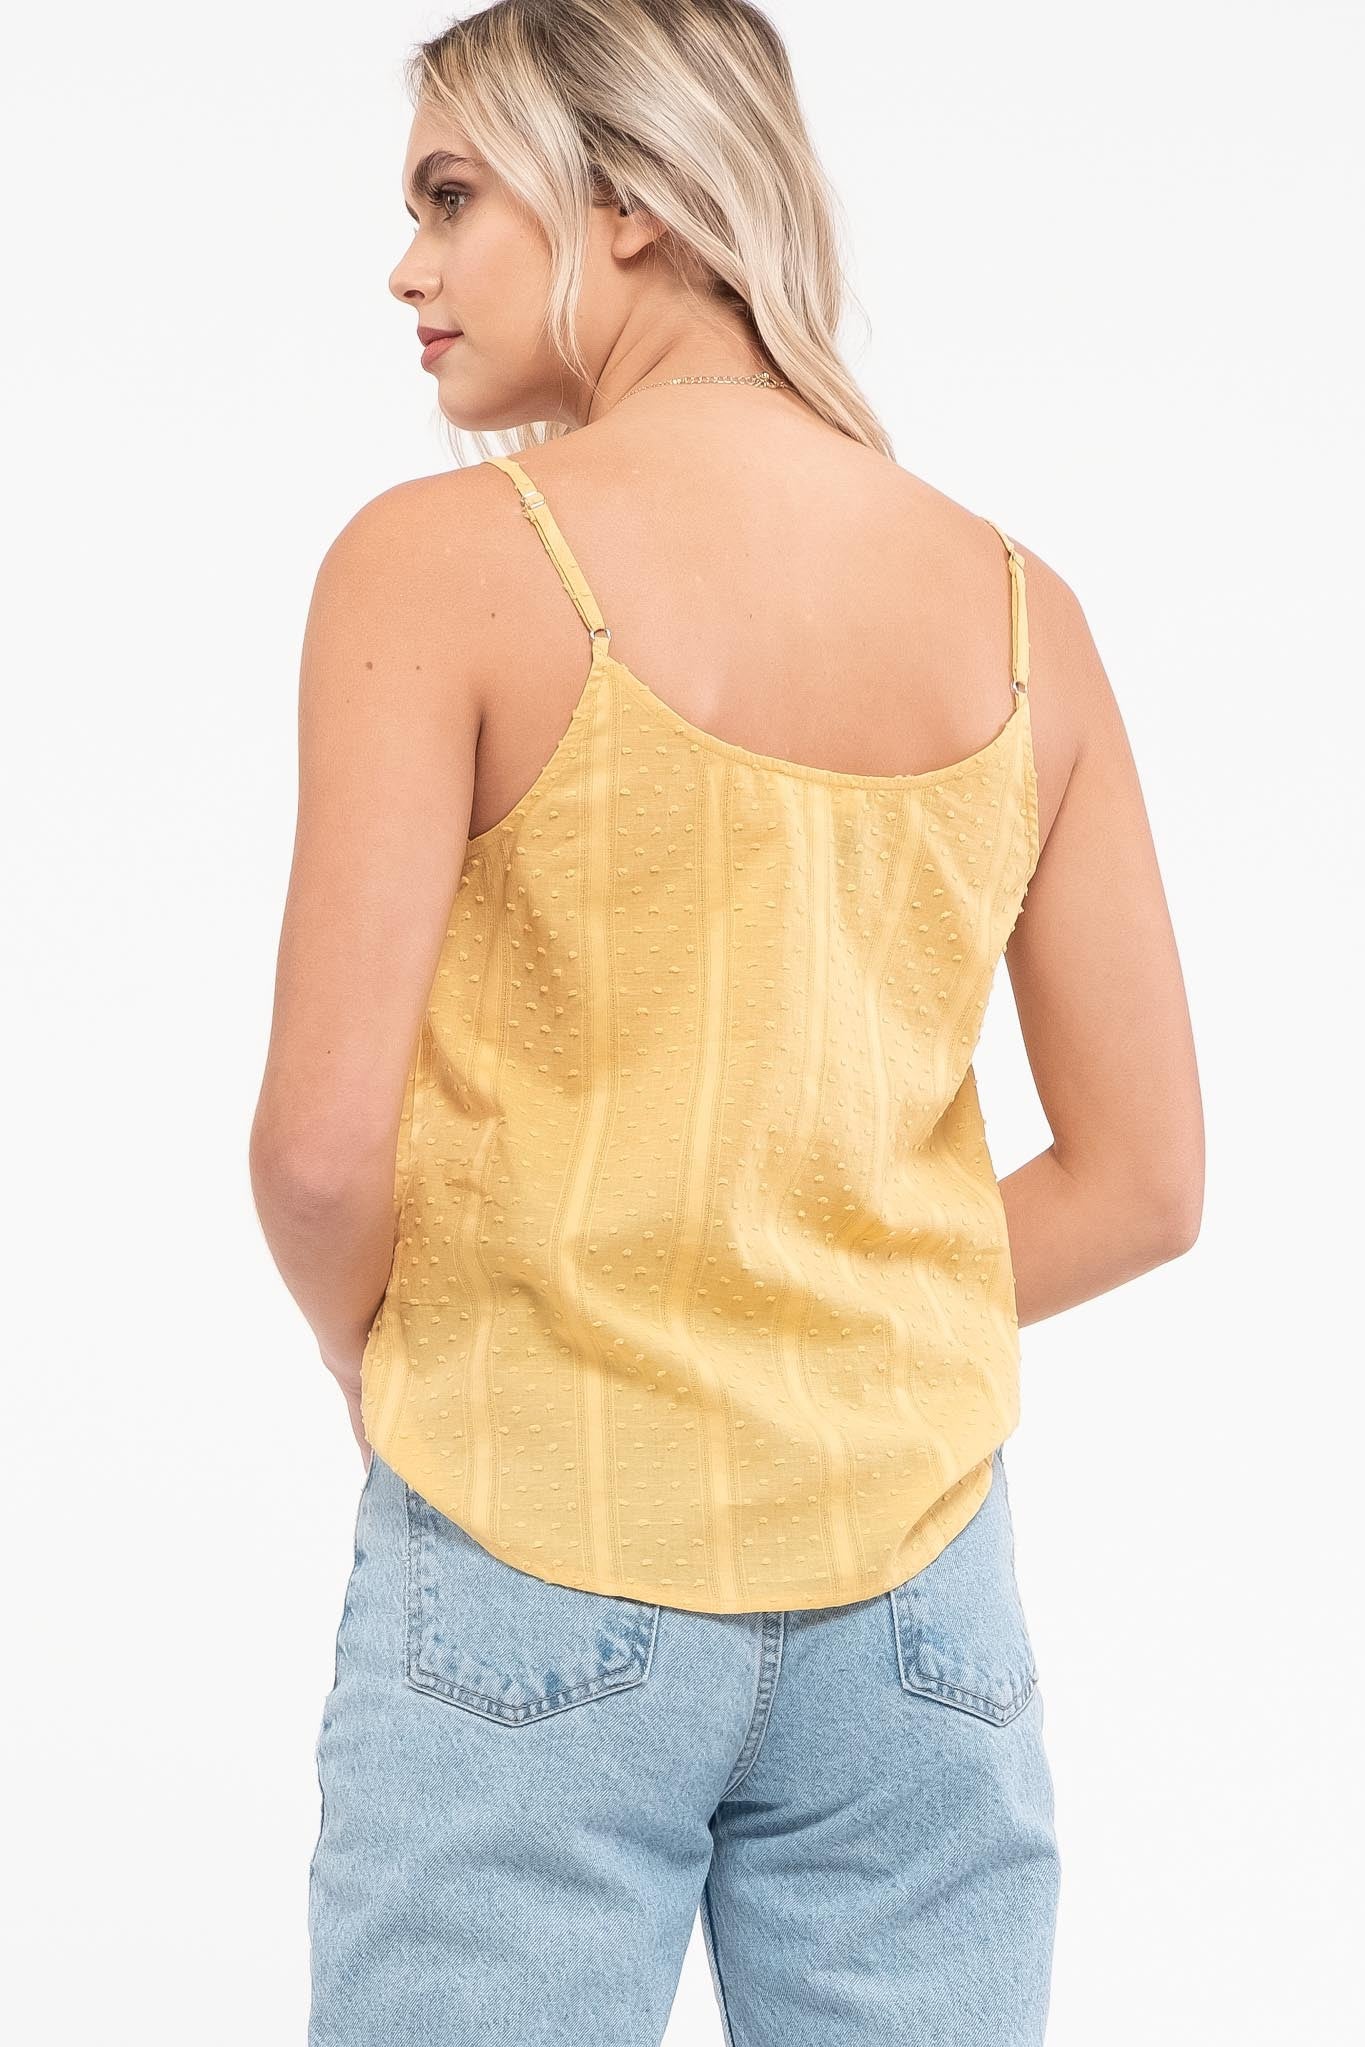 The Lia Dotted Lace Tank